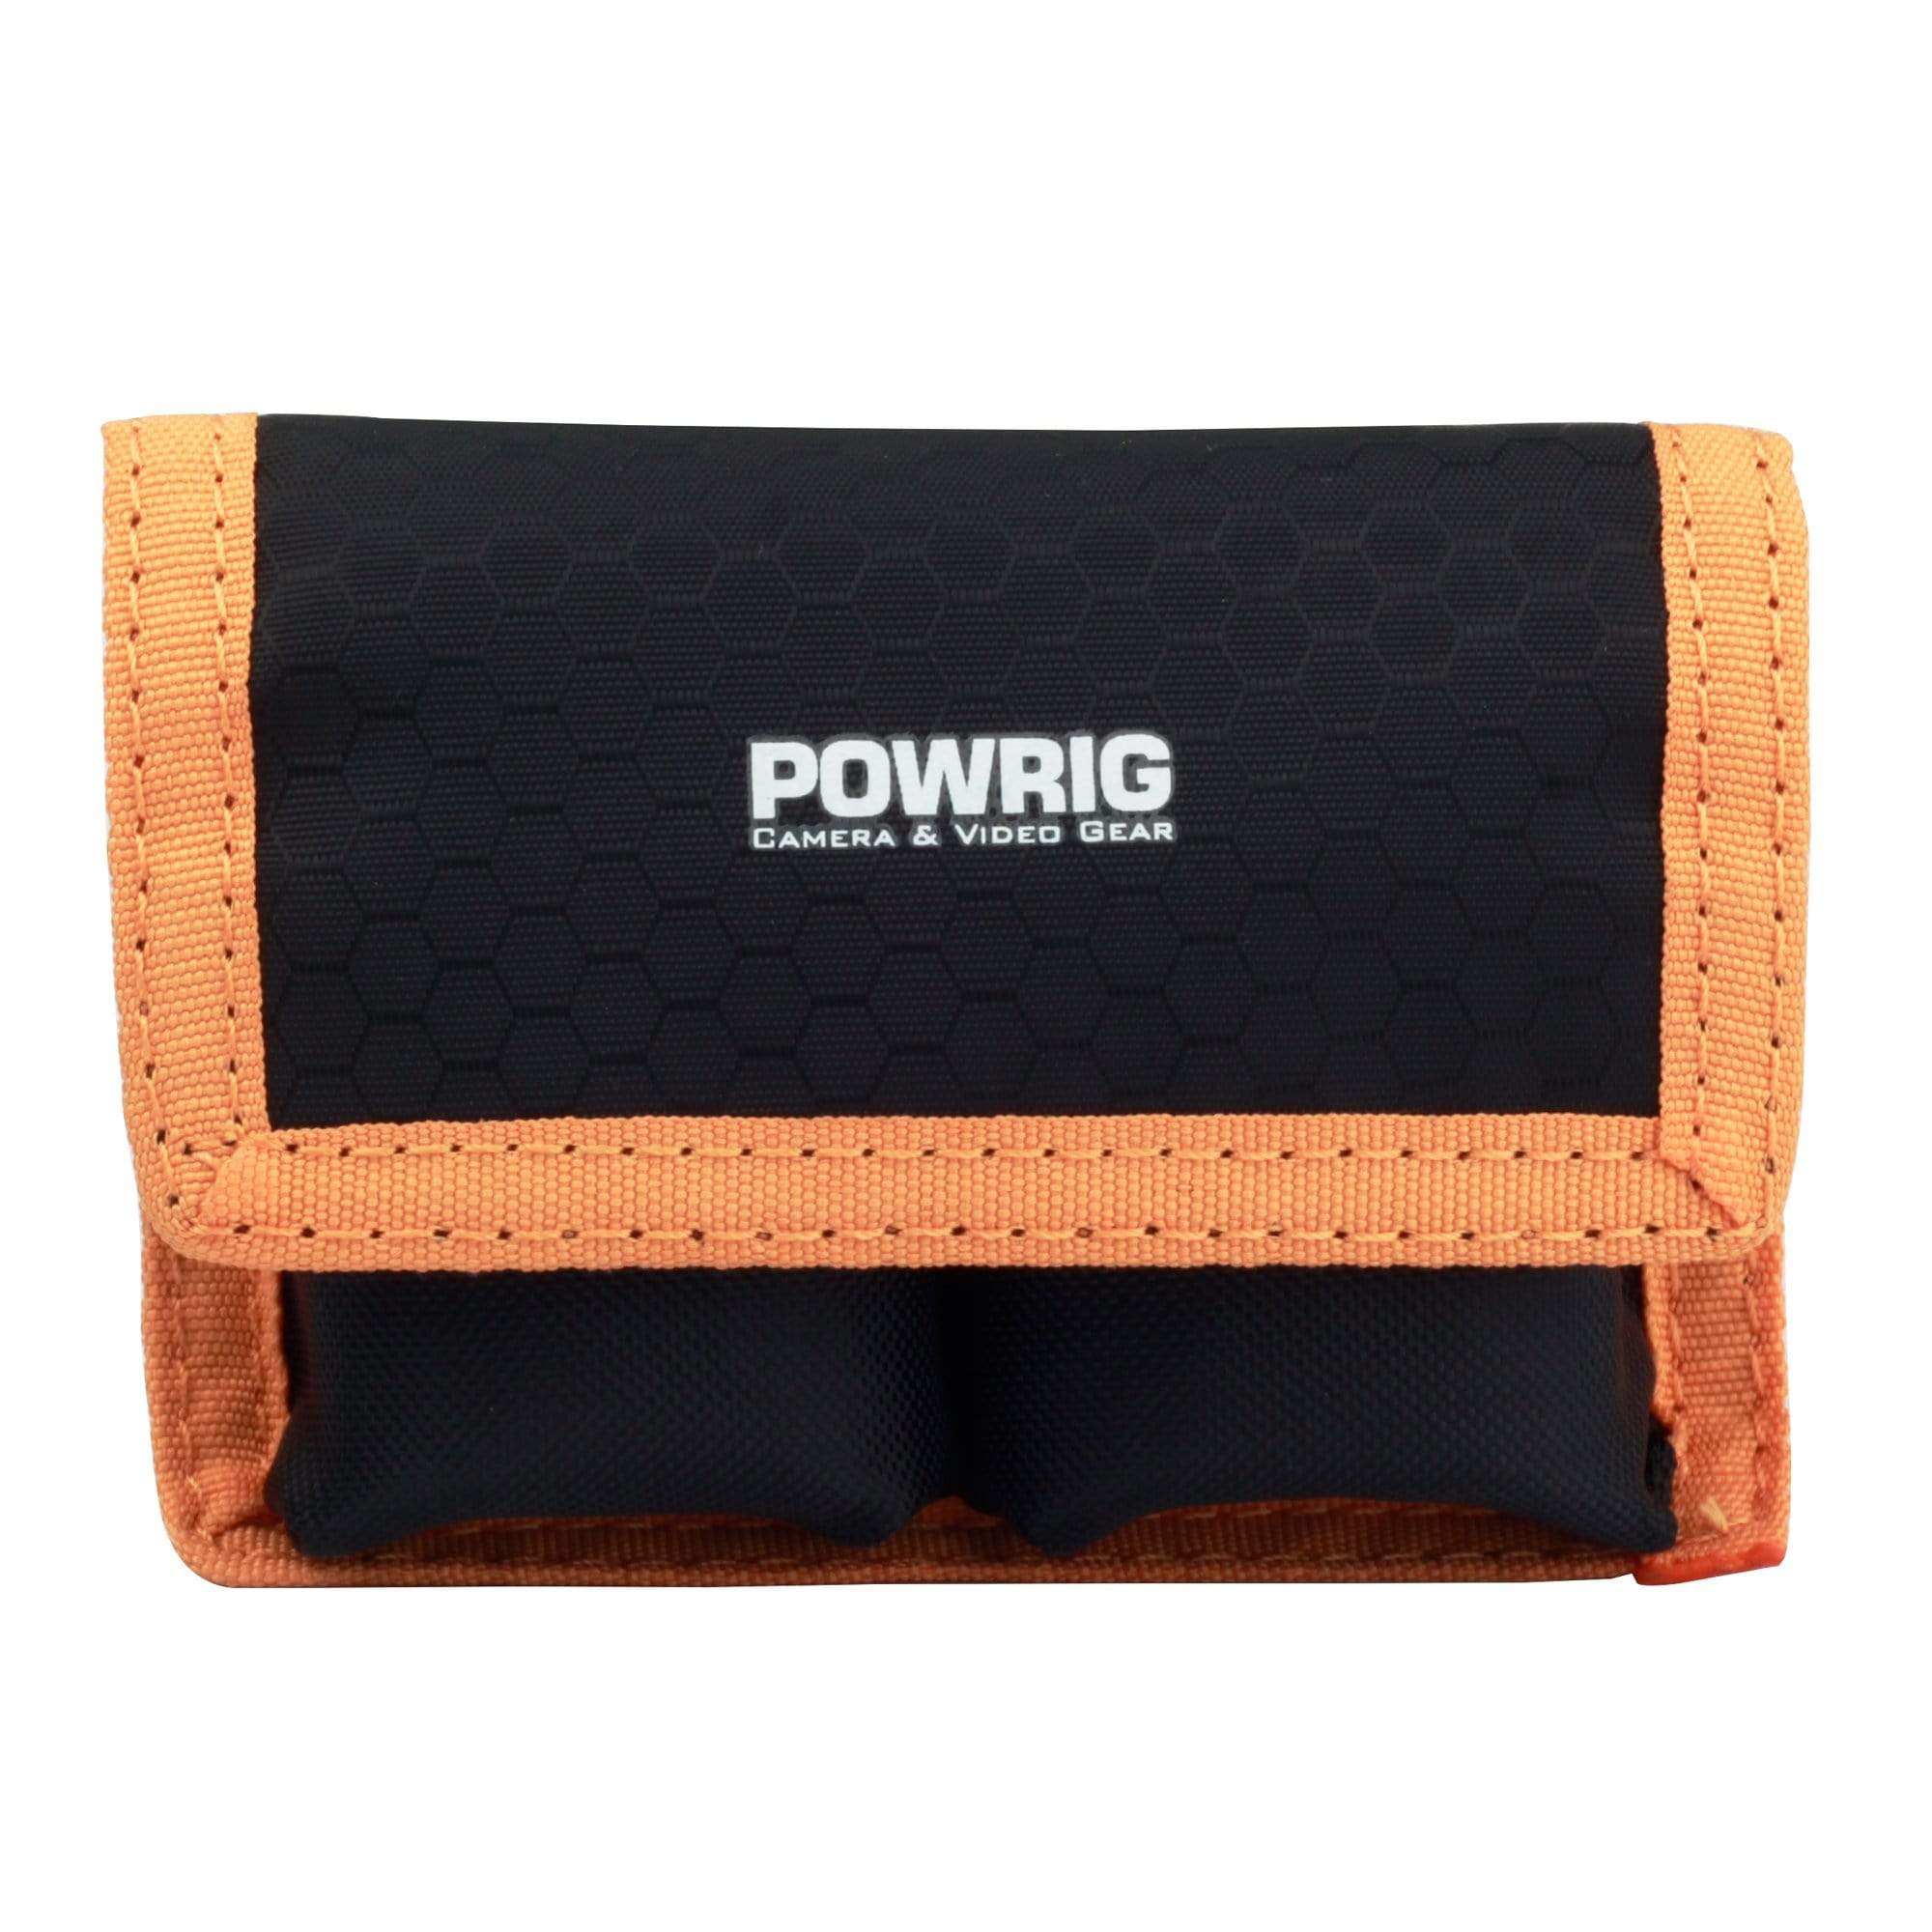 POWRIG power cable & cords POWRIG DSLR Camera Battery Pack/Case/Bag/Holder with 2 Pouches